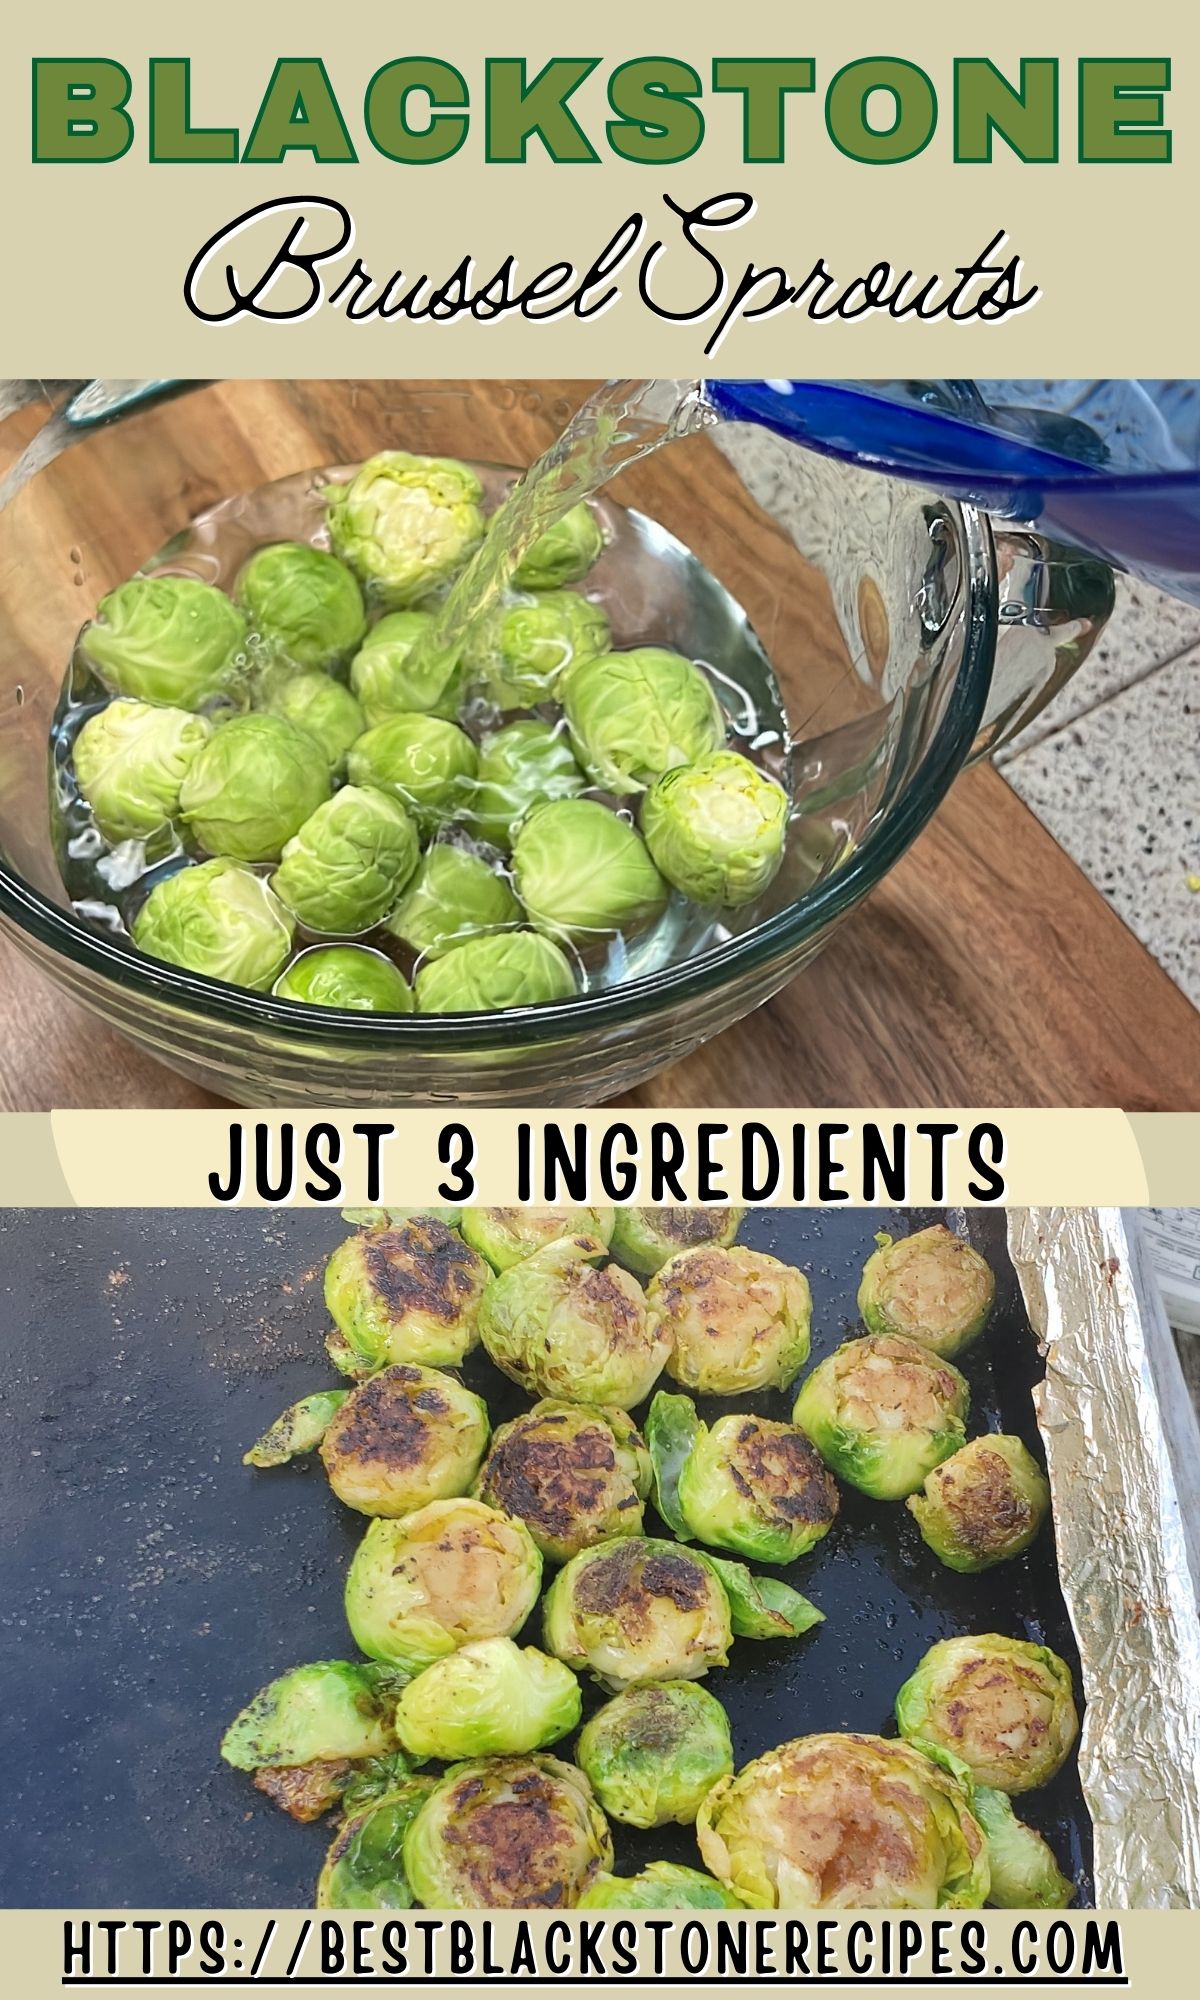 Outback Blackstone Brussels sprouts just 3 ingredients.